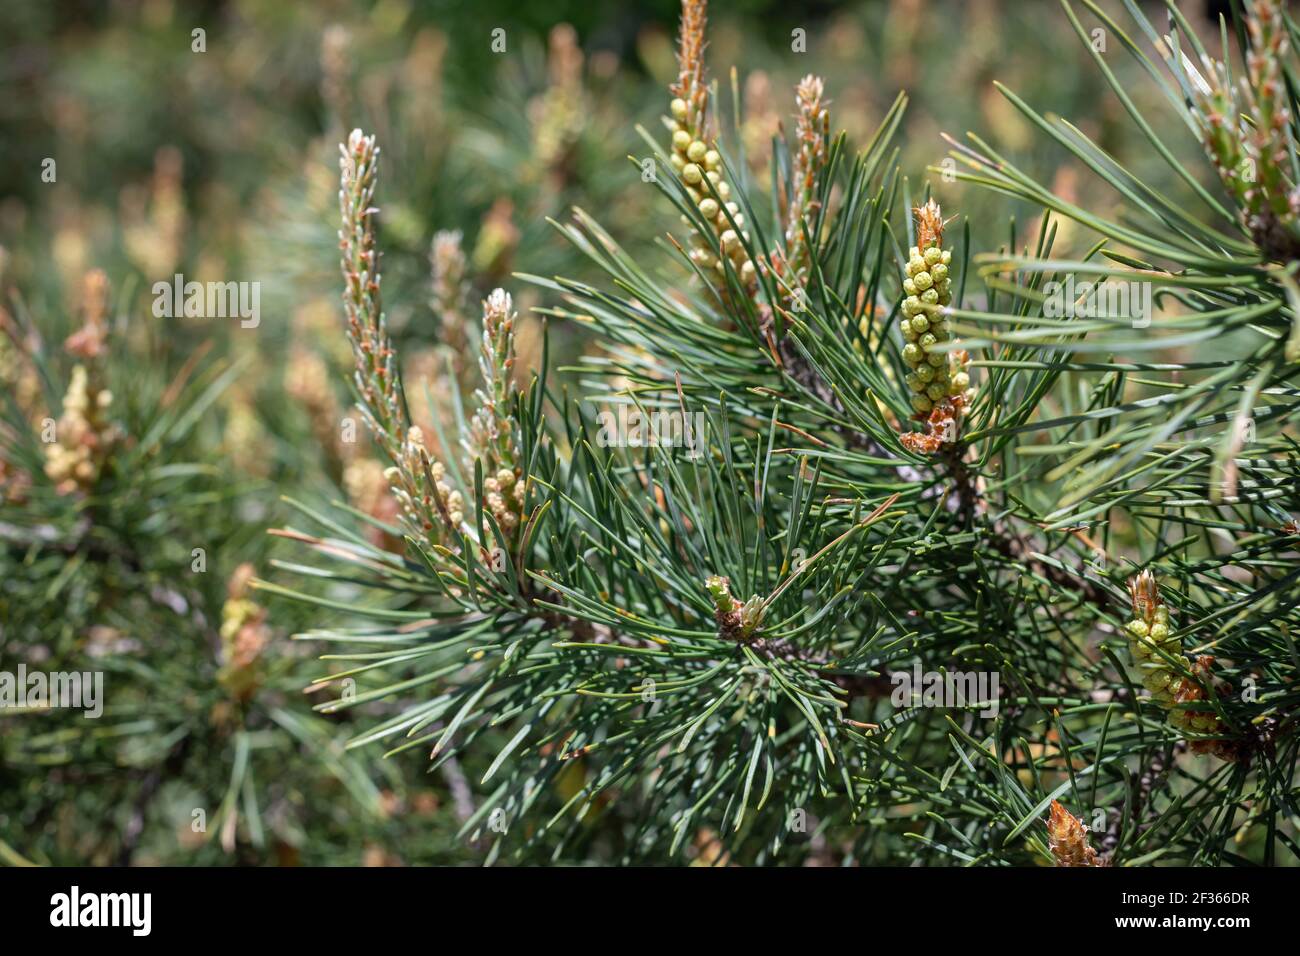 growing young pine cones on a sunny spring day on a green blurry background. floral background. selective focus Stock Photo